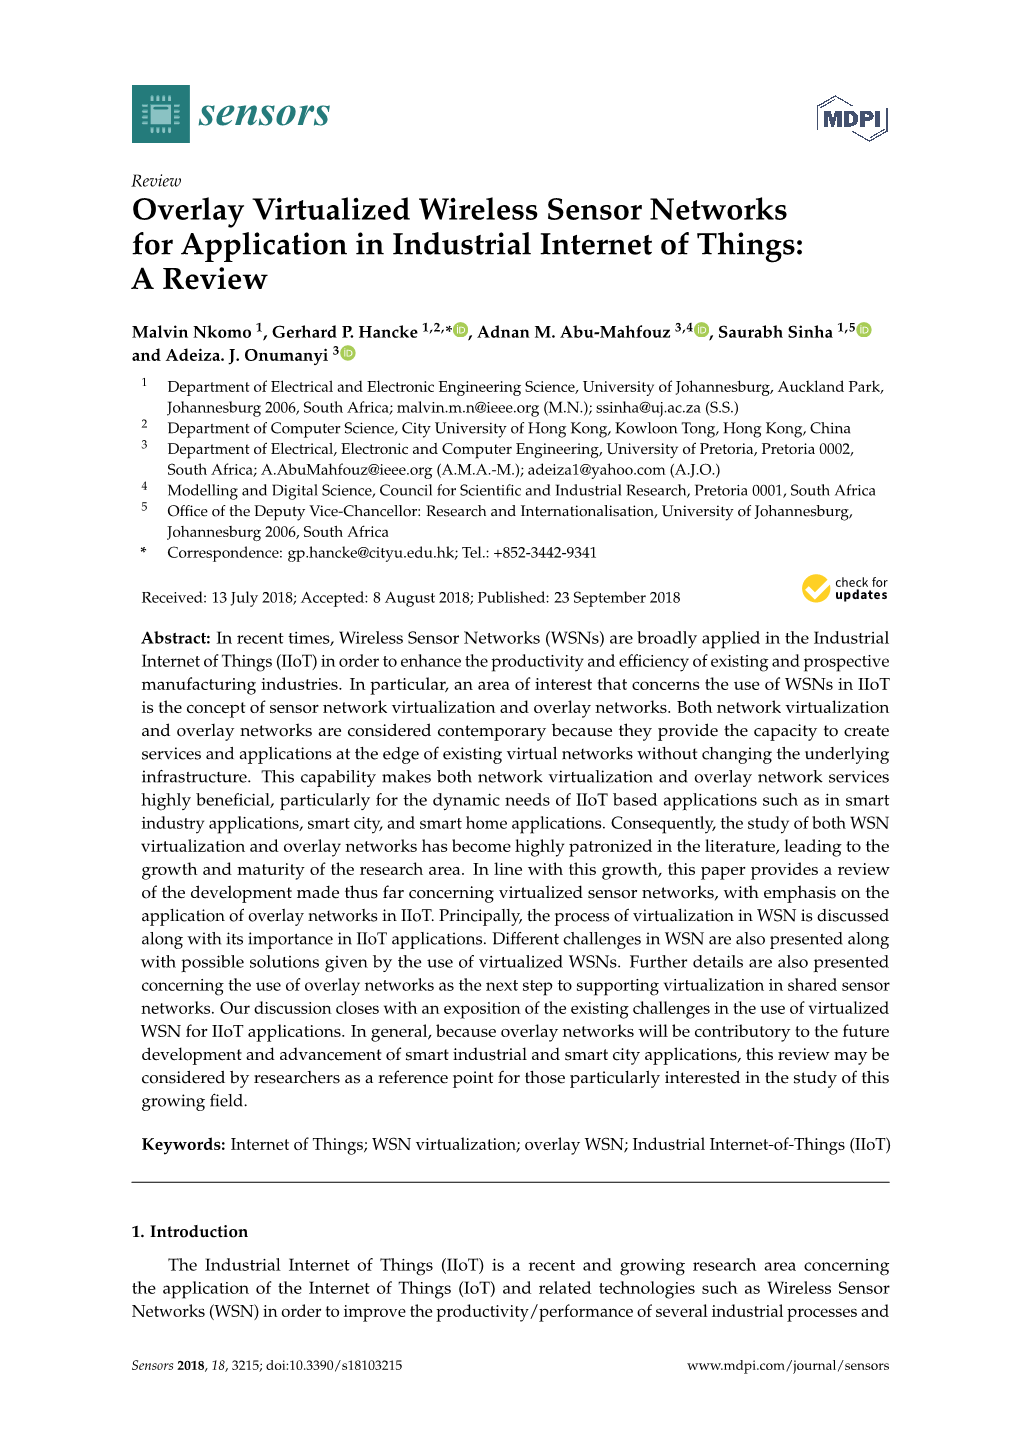 Overlay Virtualized Wireless Sensor Networks for Application in Industrial Internet of Things: a Review